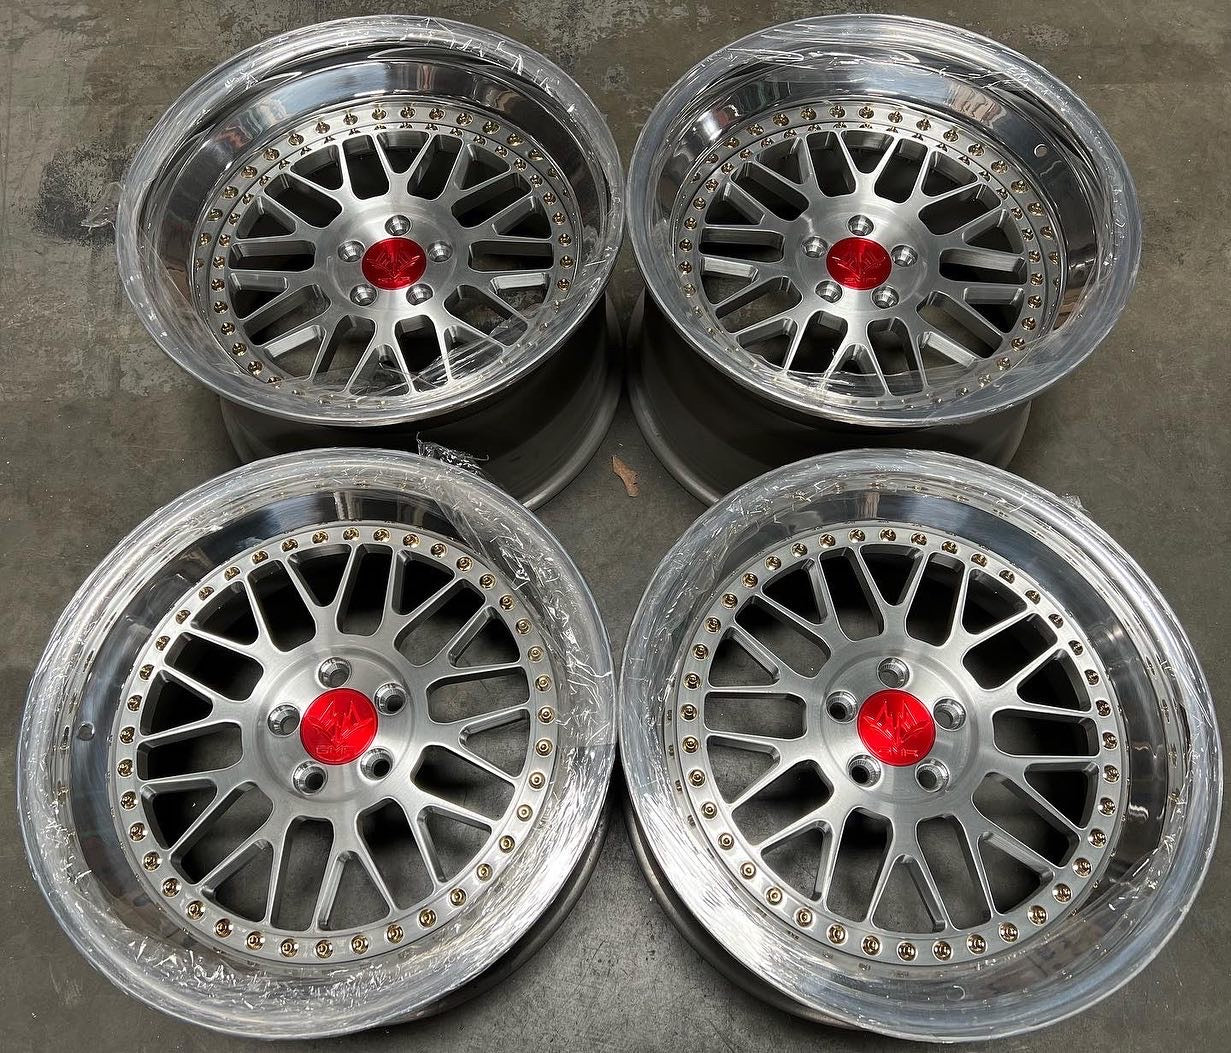 18” GMR GS-2 double step 5x100 (Inventory set)